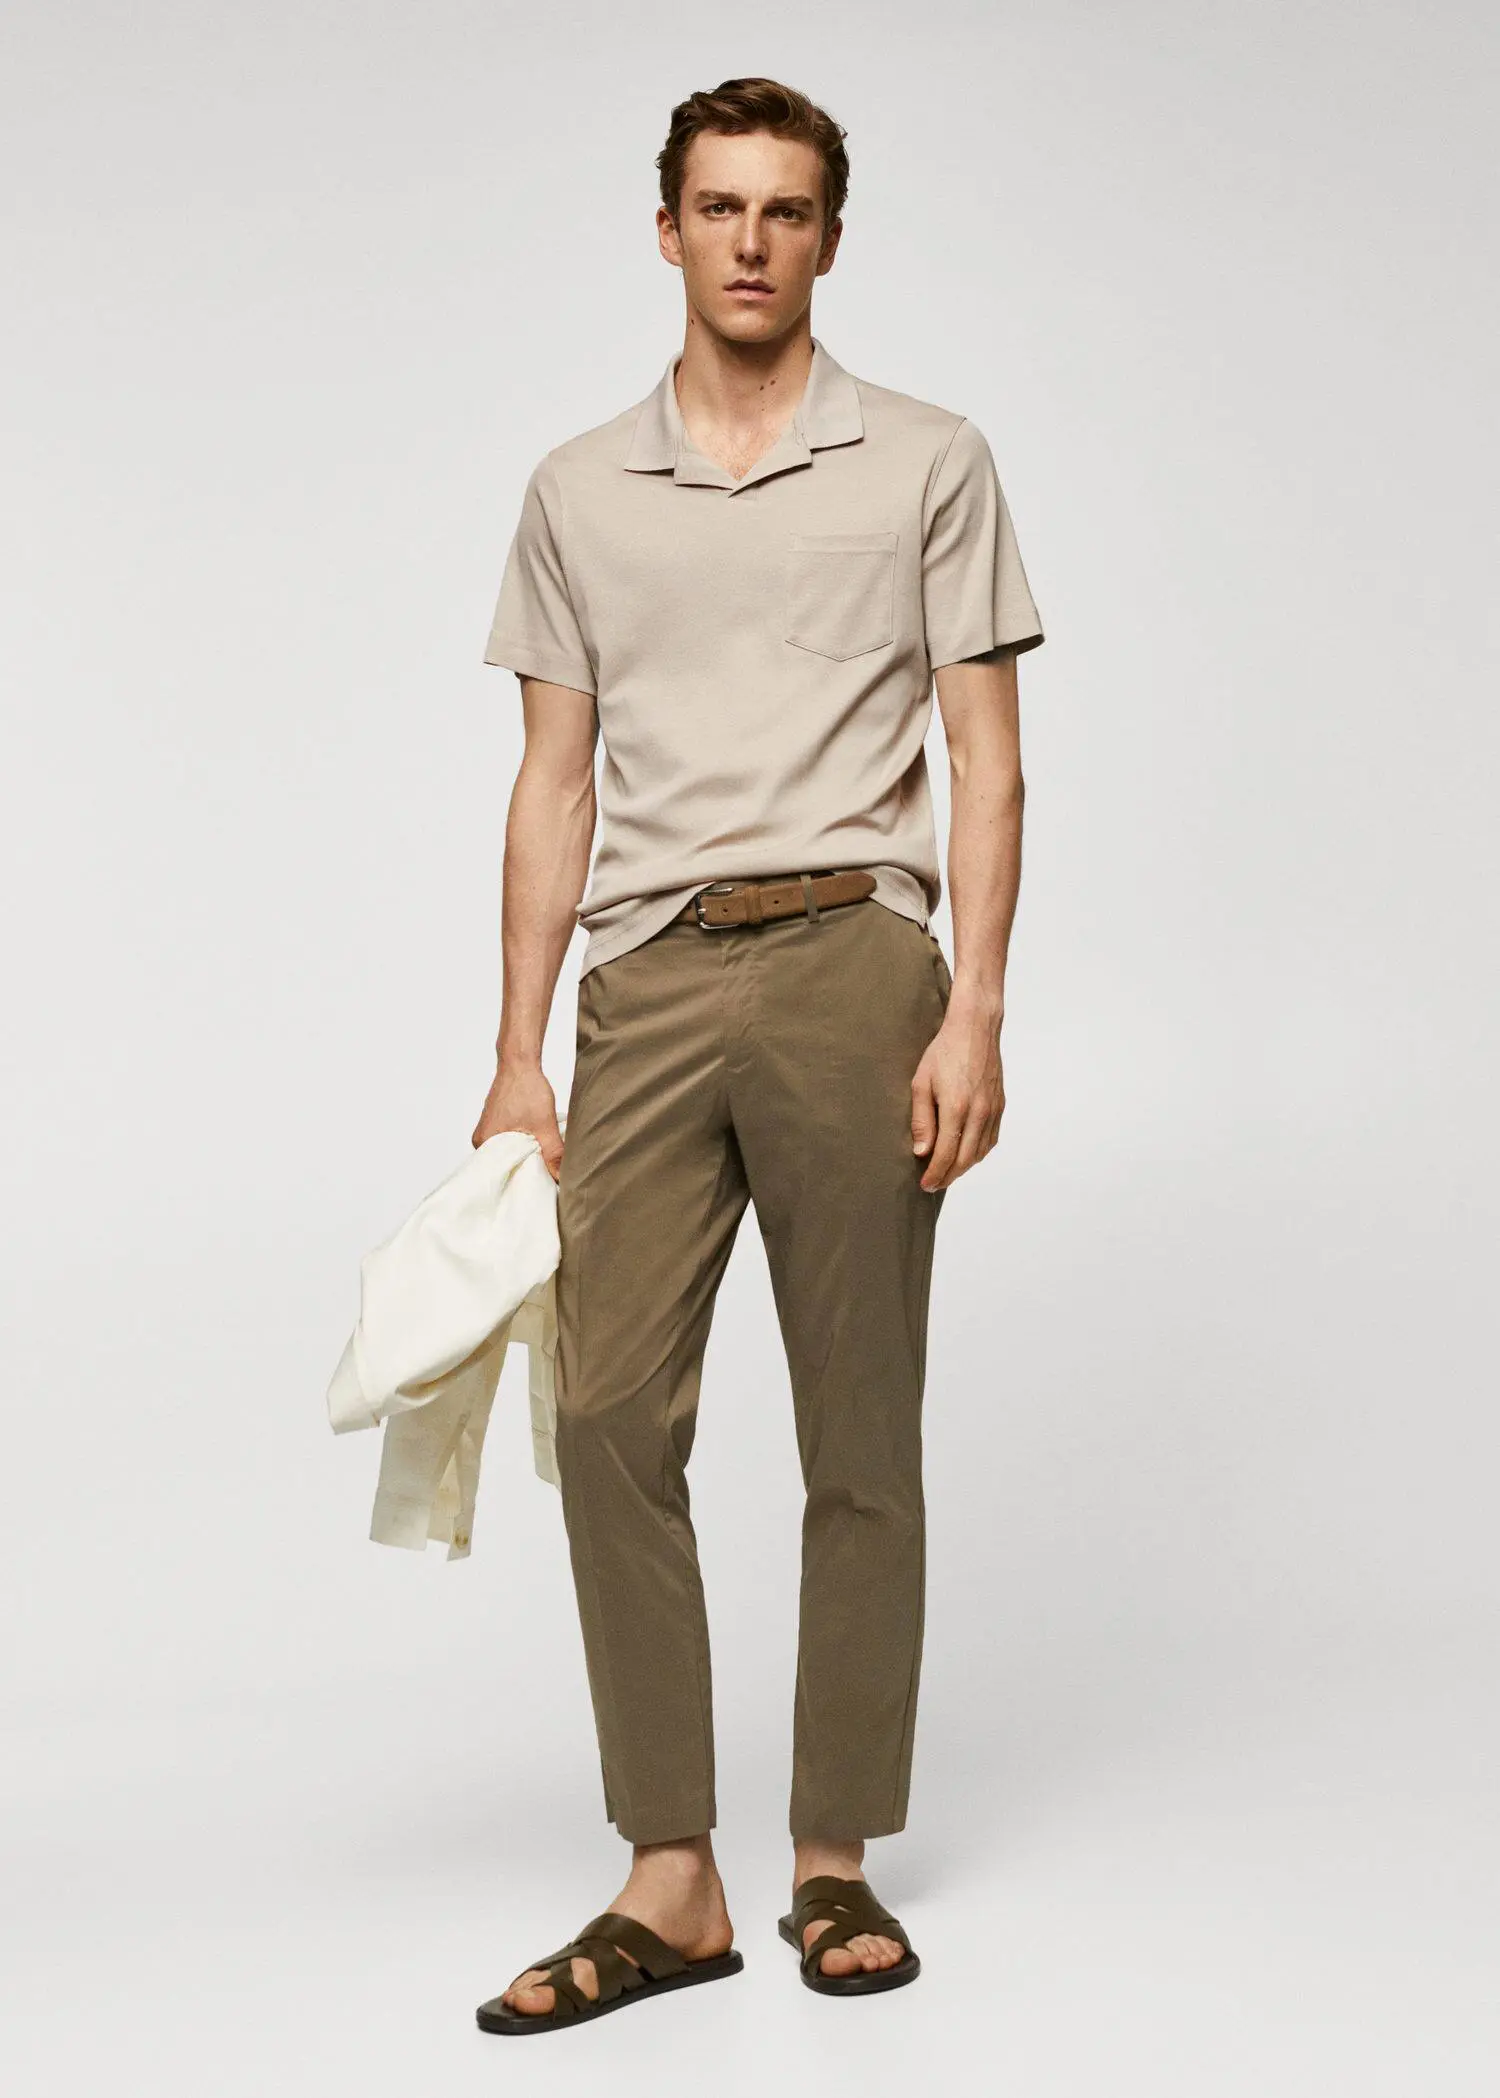 Mango 100% cotton polo shirt with pocket. a man in a tan shirt and brown pants. 